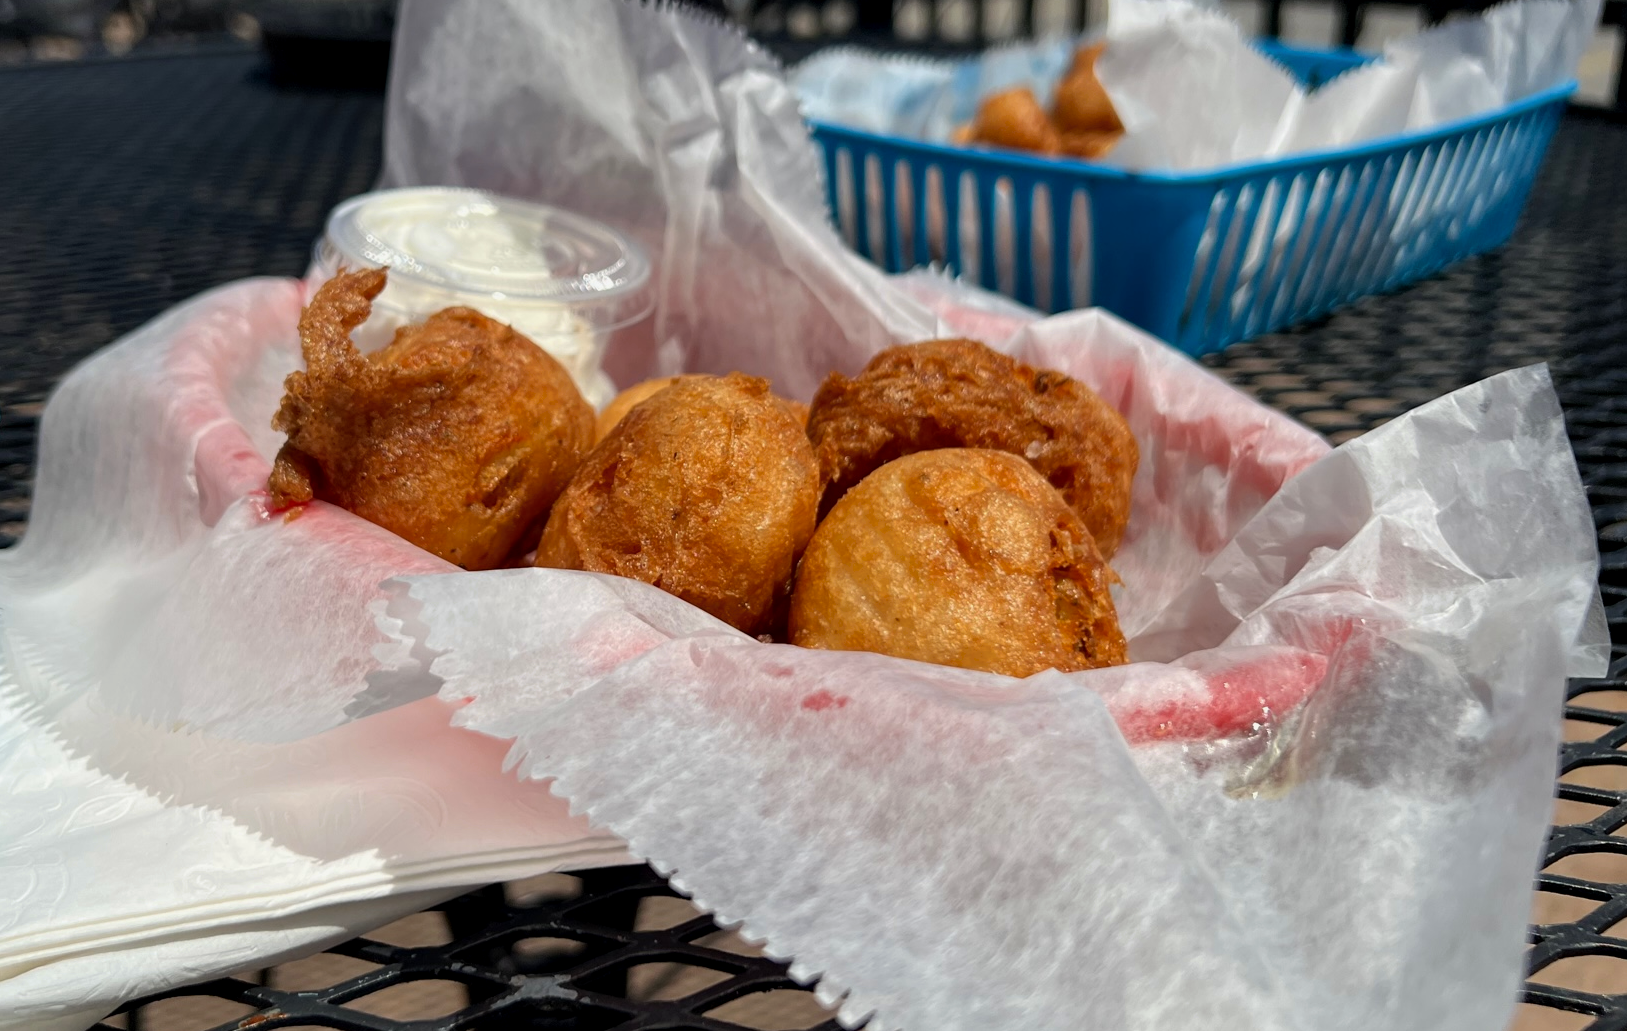 On a patio table on a sunny day, there is a parchment paper lined basket with huge fried, breaded balls of mashed potato. Photo by Alyssa Buckley.